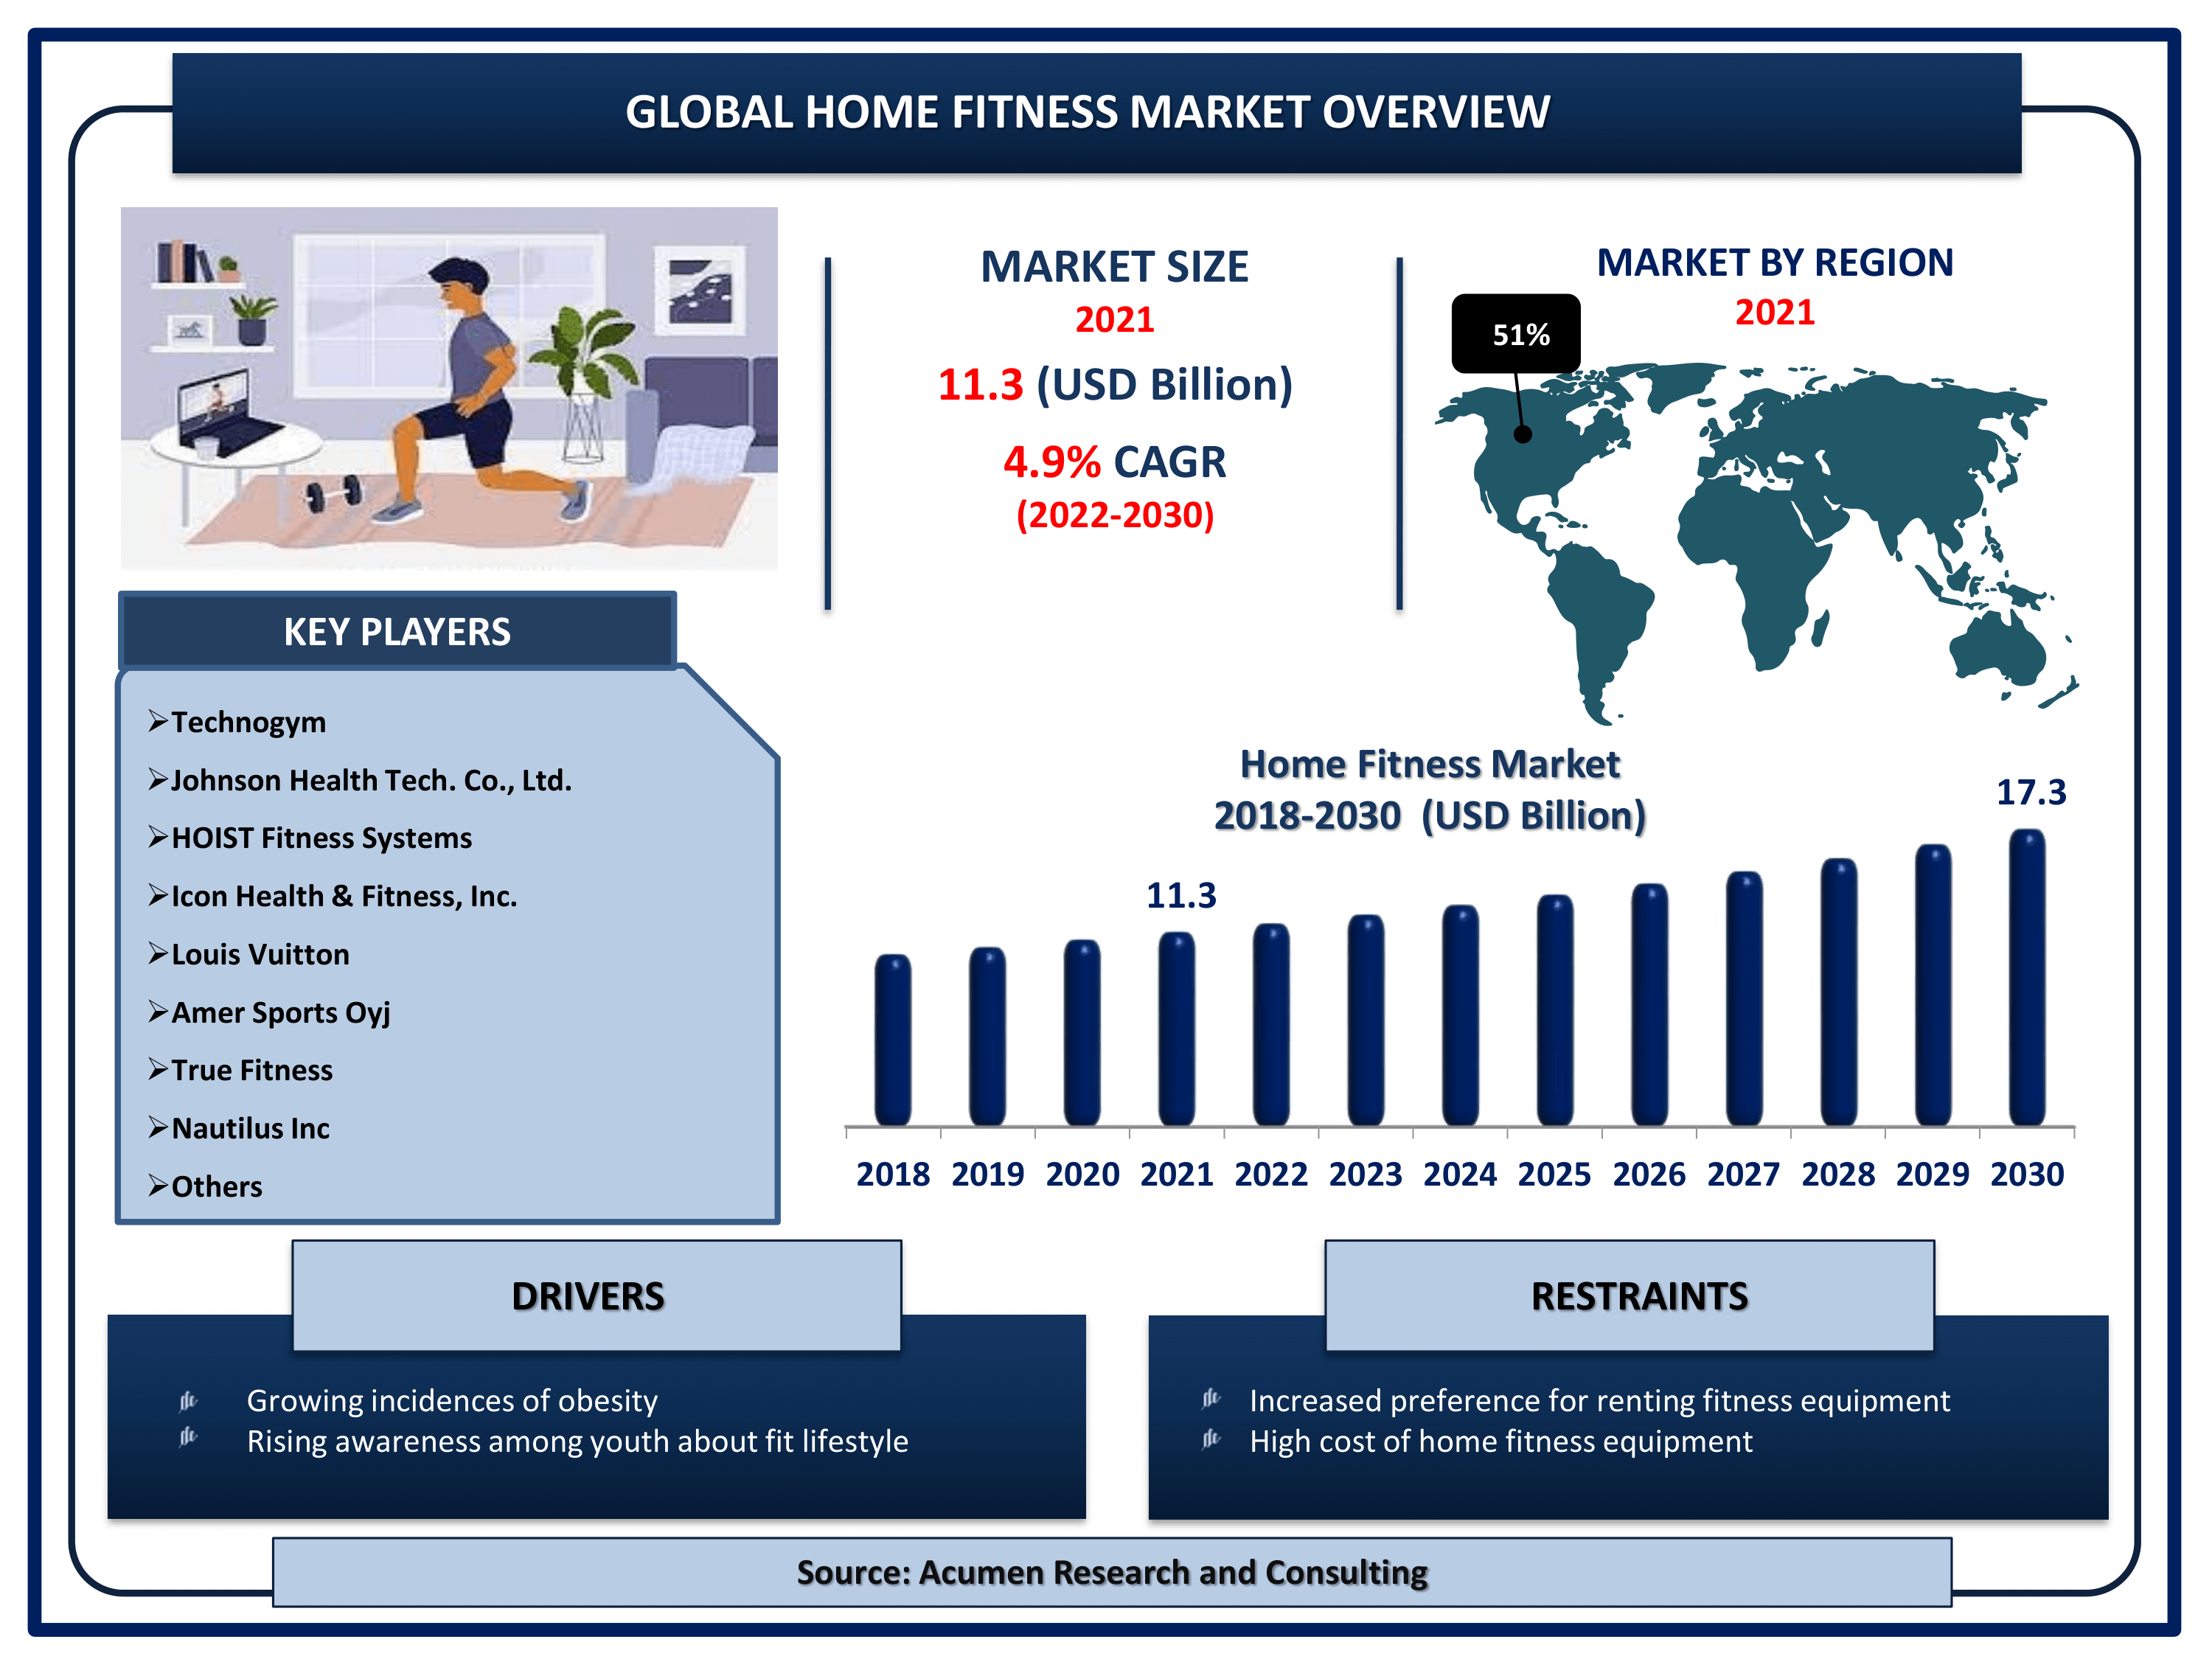 Global home fitness market revenue is estimated to reach USD 17.3 Billion by 2030 with a CAGR of 4.9% from 2022 to 2030